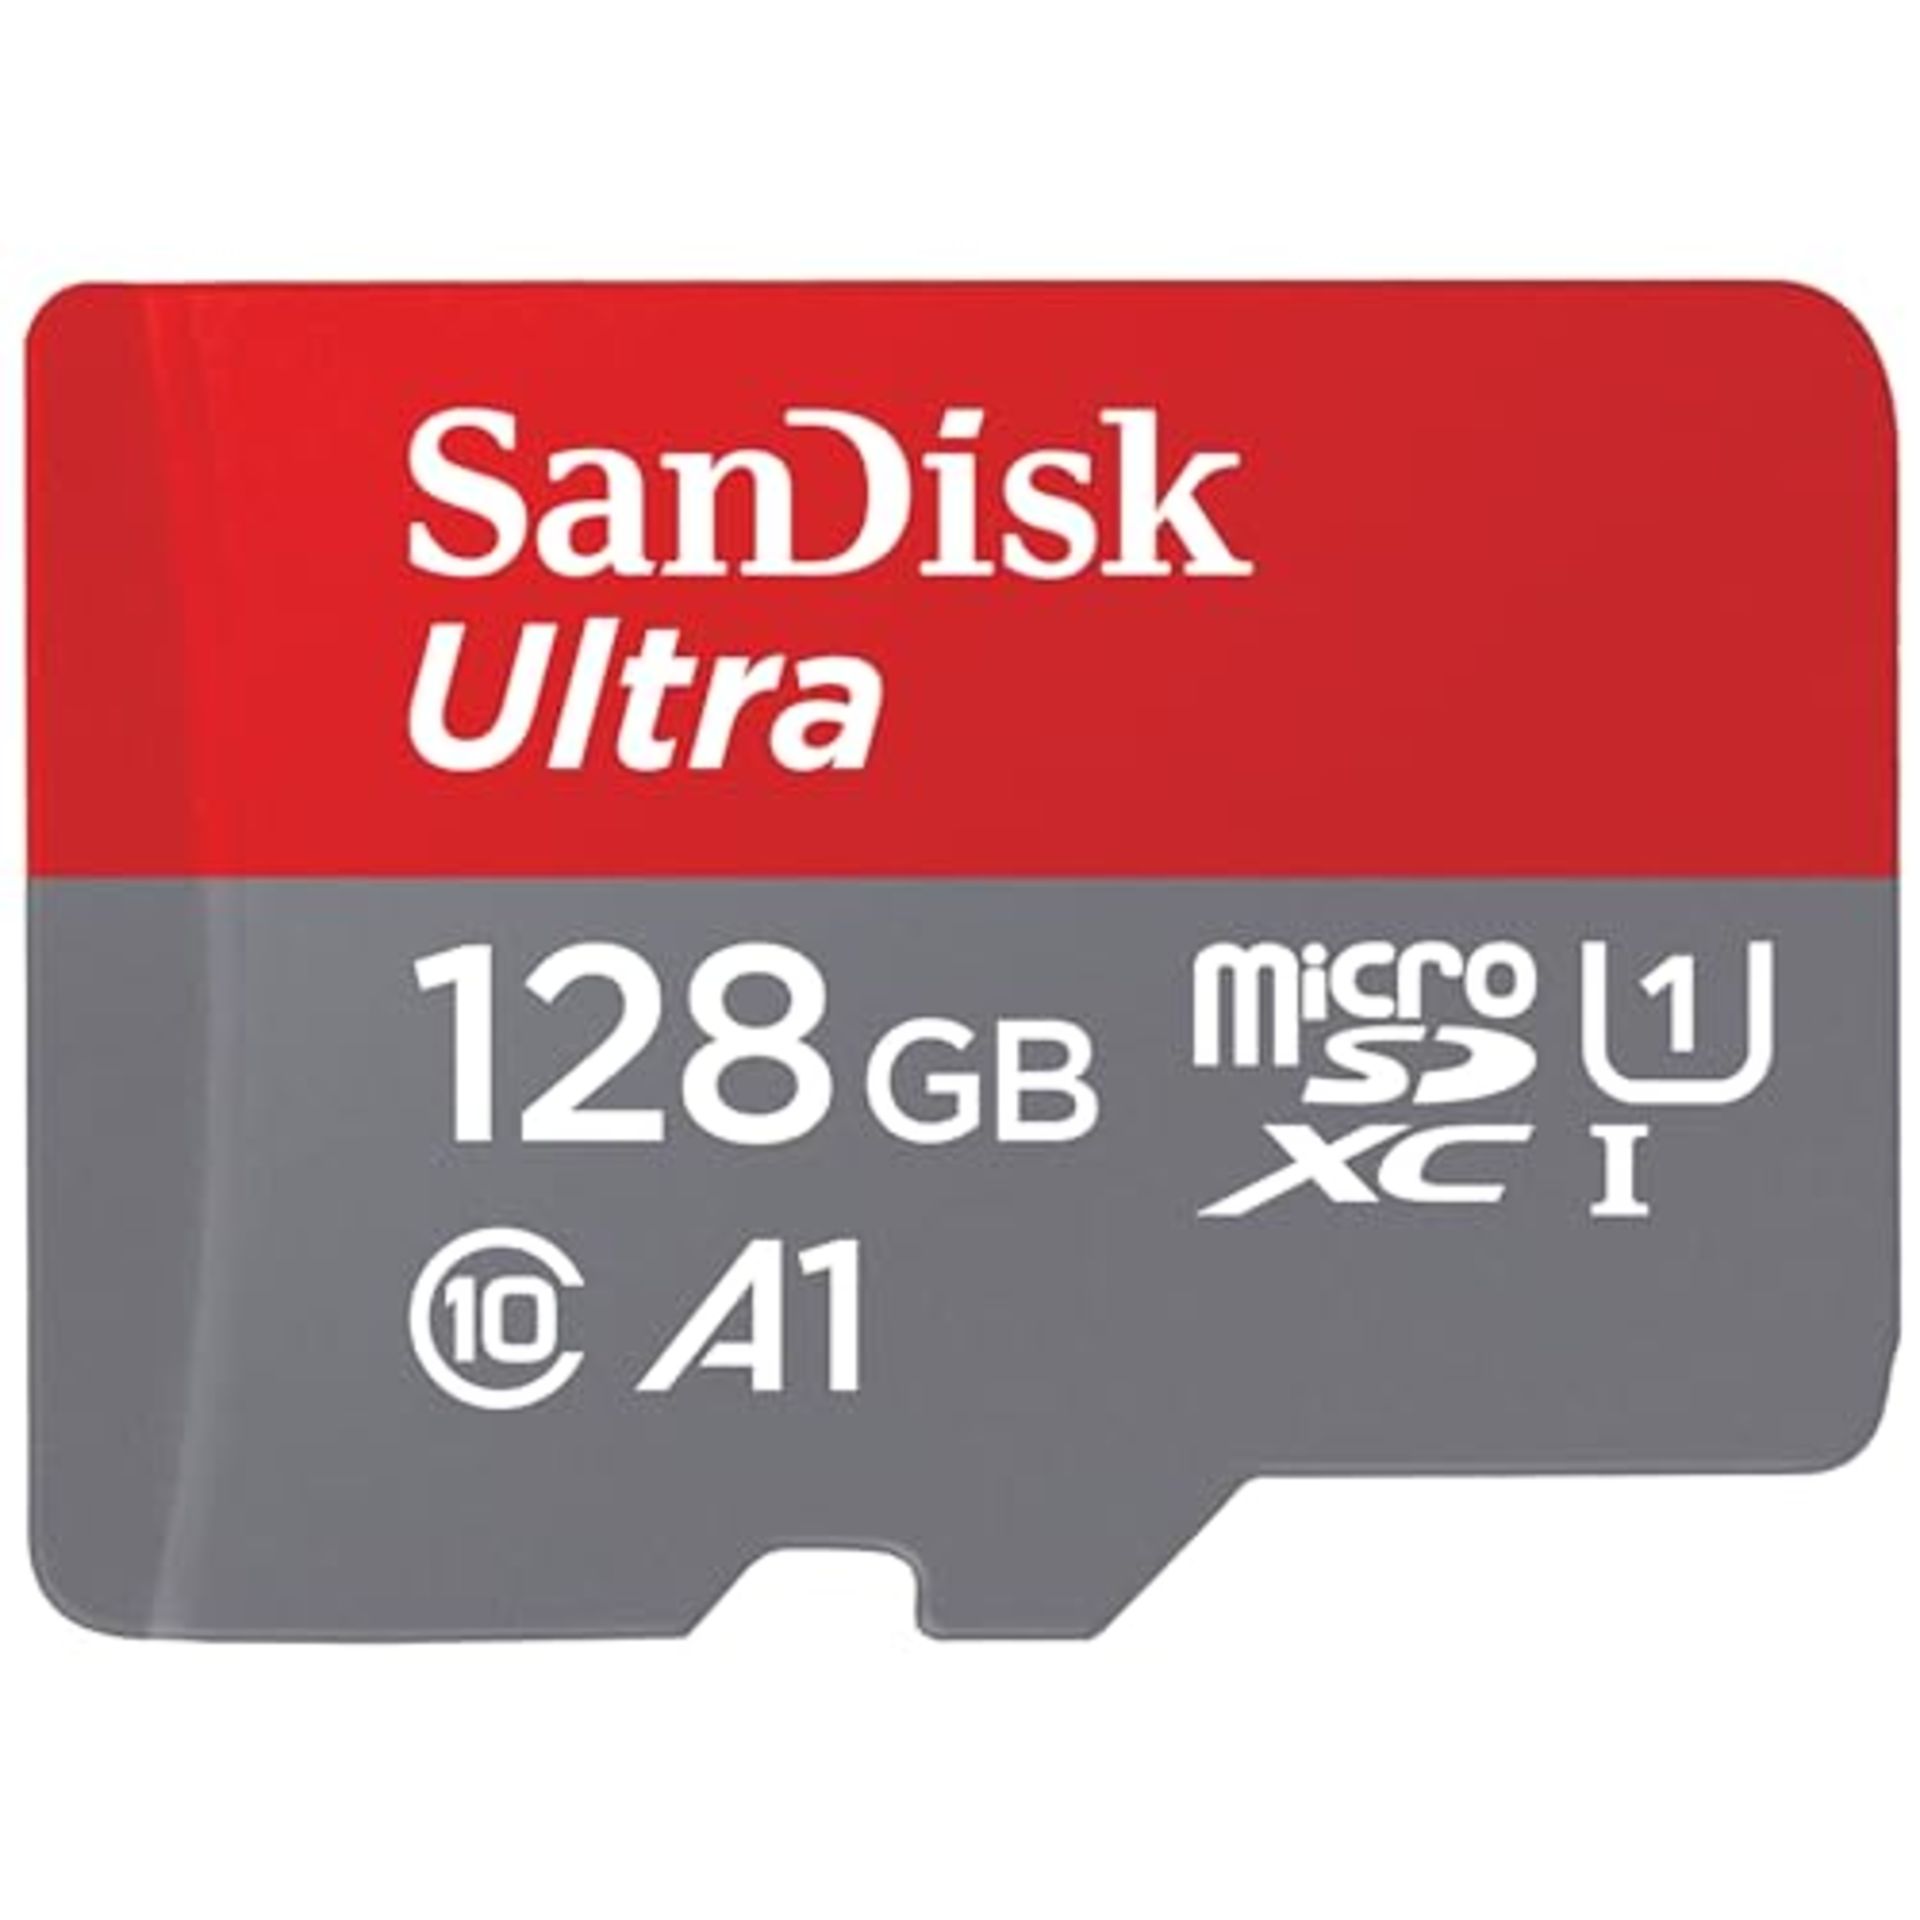 SanDisk 128GB Ultra microSDXC card + SD adapter up to 140 MB/s with Class A1 applicati - Image 3 of 4